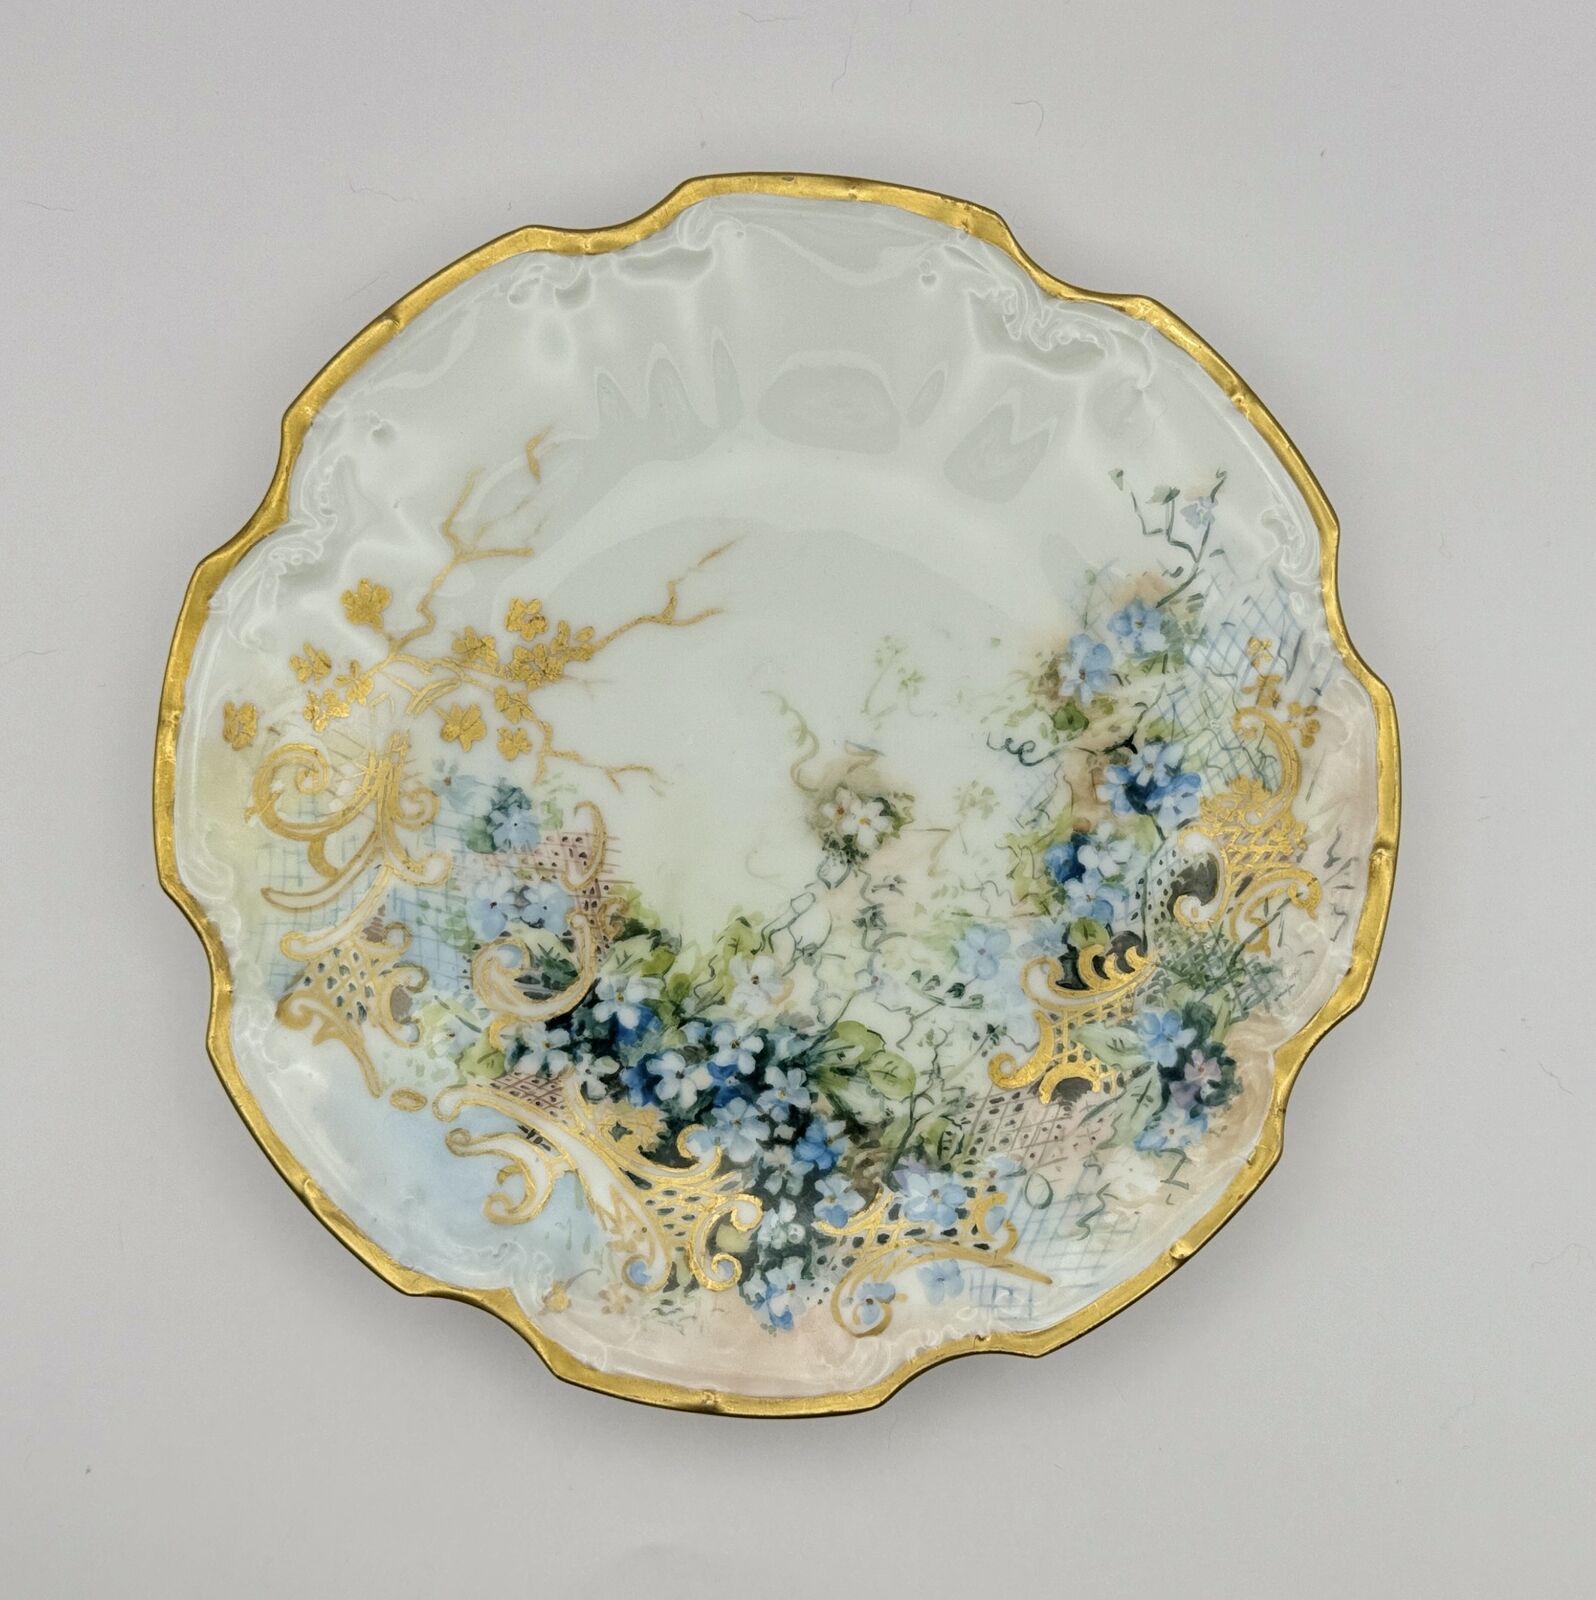 Stunning Antique Limoges Hand-Painted Plate with Gold and Floral Design